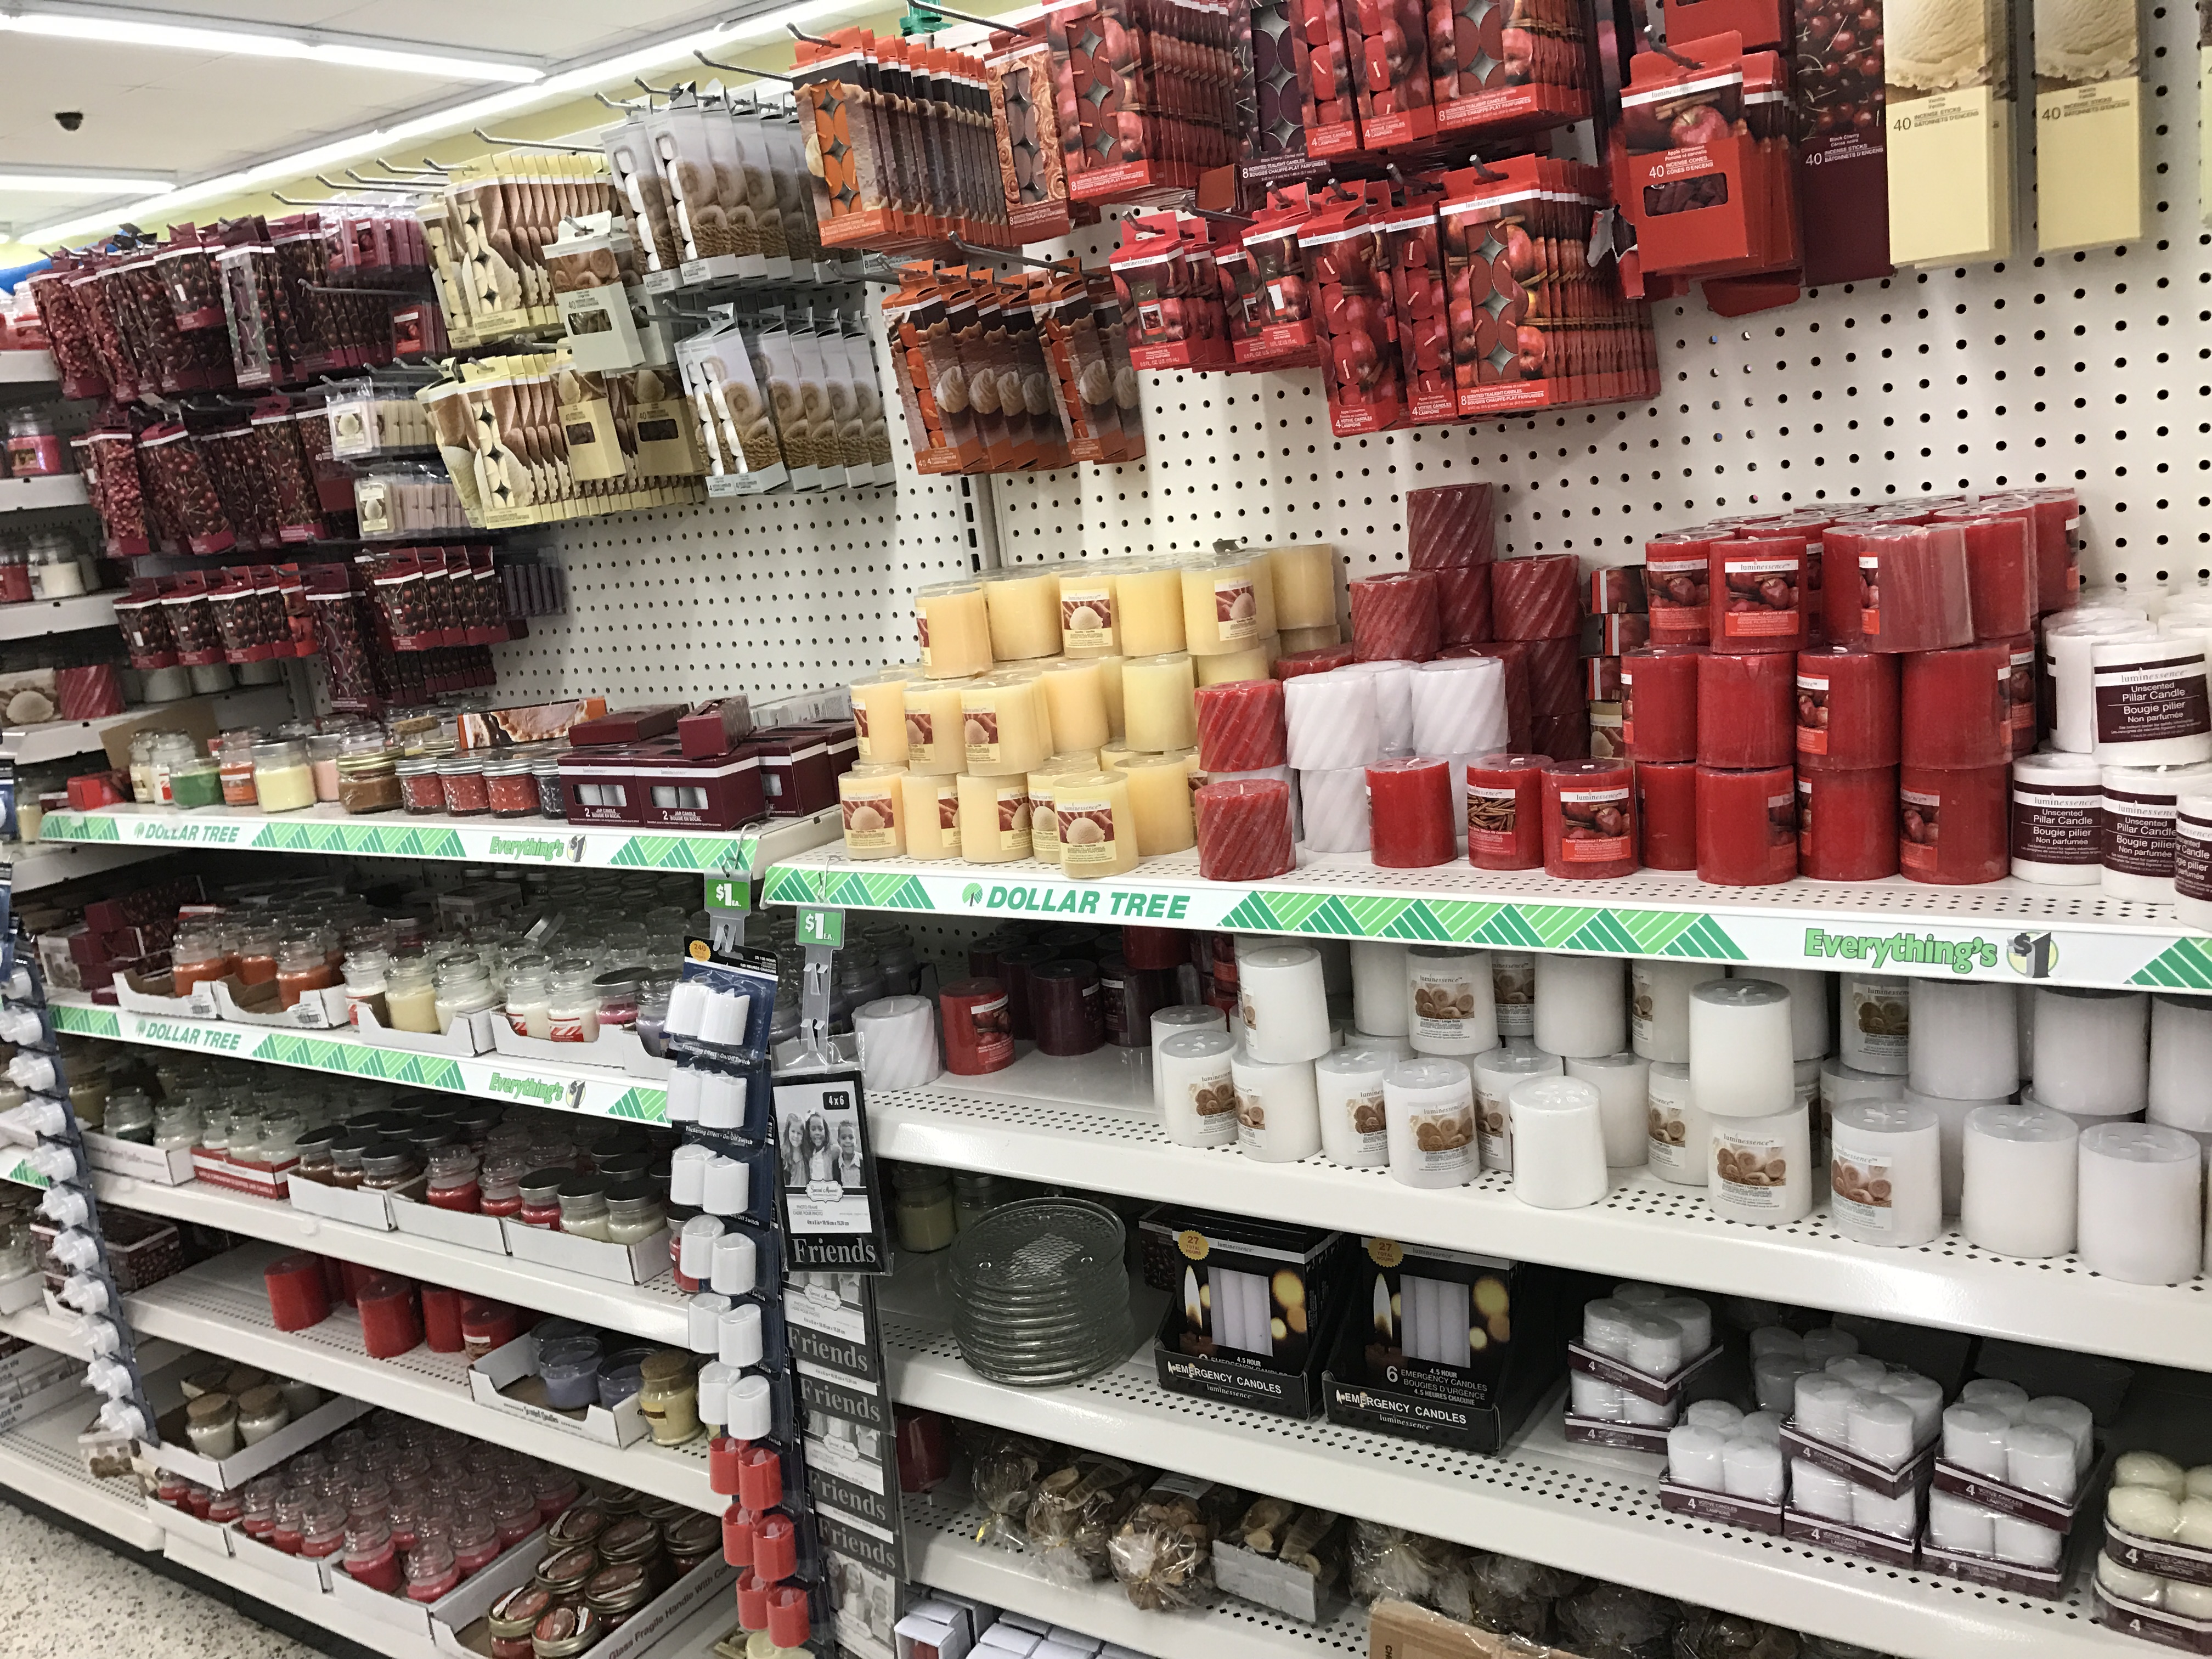 30 Christmas Items to Buy at the Dollar Tree To Save Money